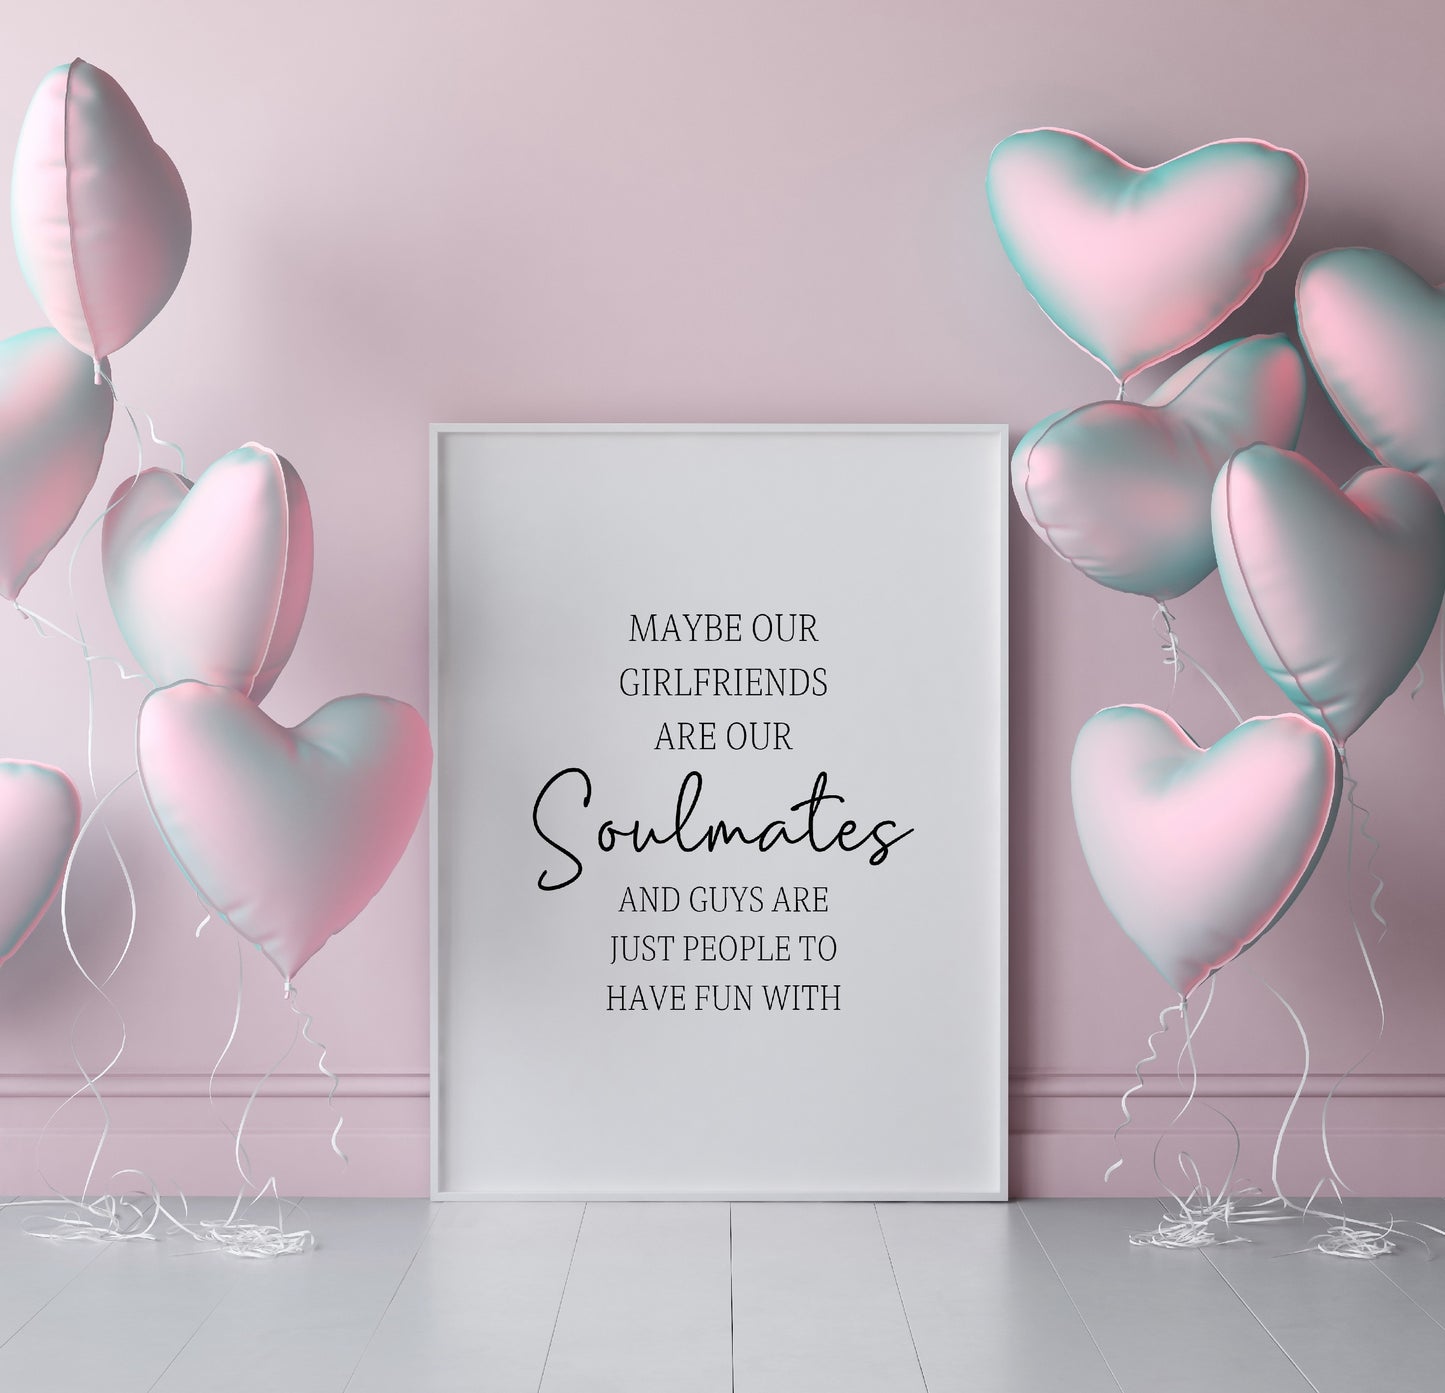 Besties Print | Soulmate Print | Friendship Print | Maybe Our Girlfriends Are Our Soulmates And Guys Are Just People To Have Fun With Print | Best Friend Gift | Best Friend Print